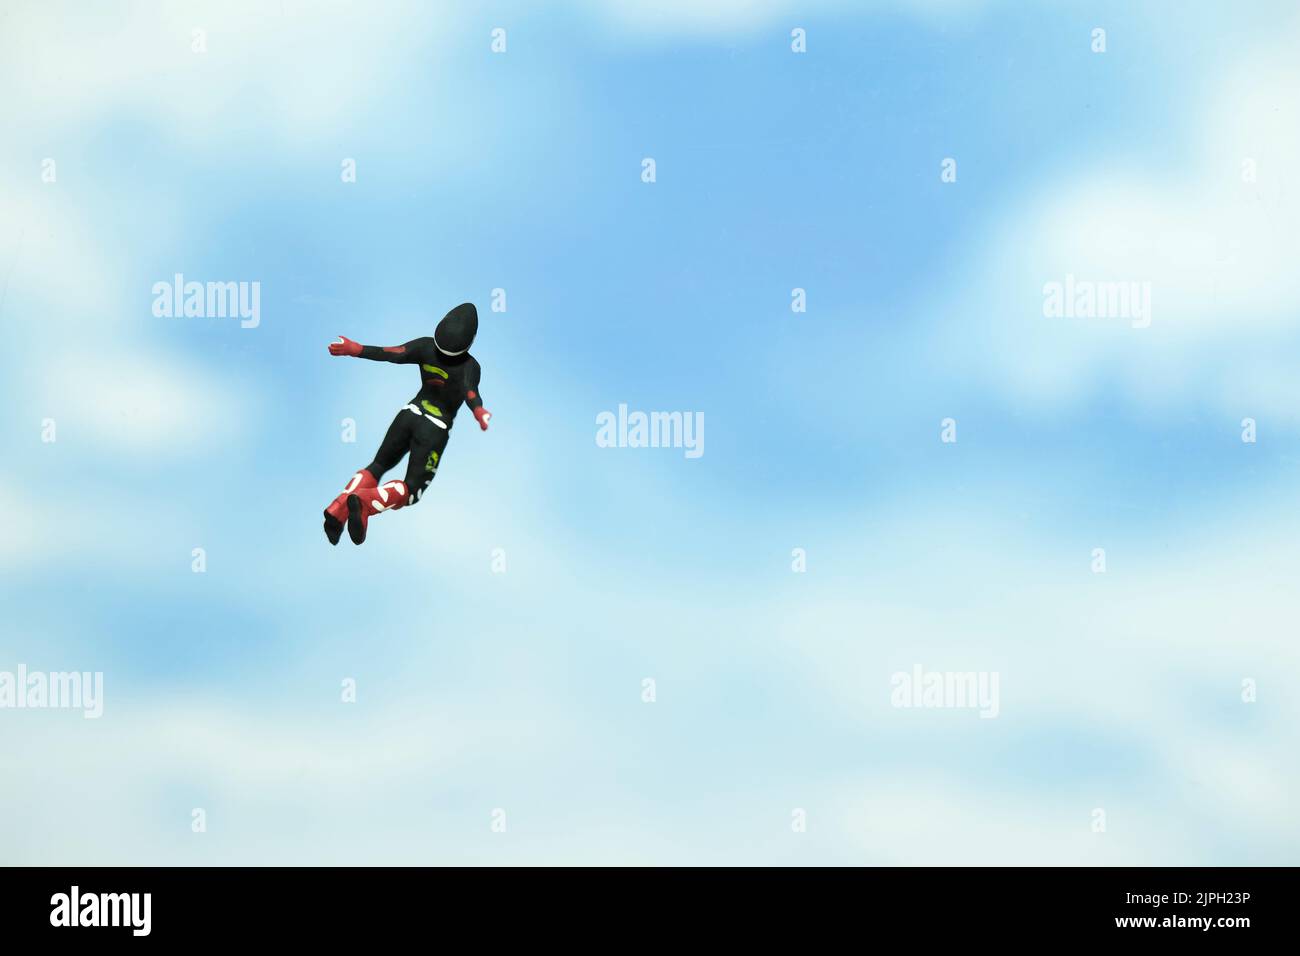 Miniature people toy figure photography. A men doing sky diving jump in cloudy bright day. Image photo Stock Photo